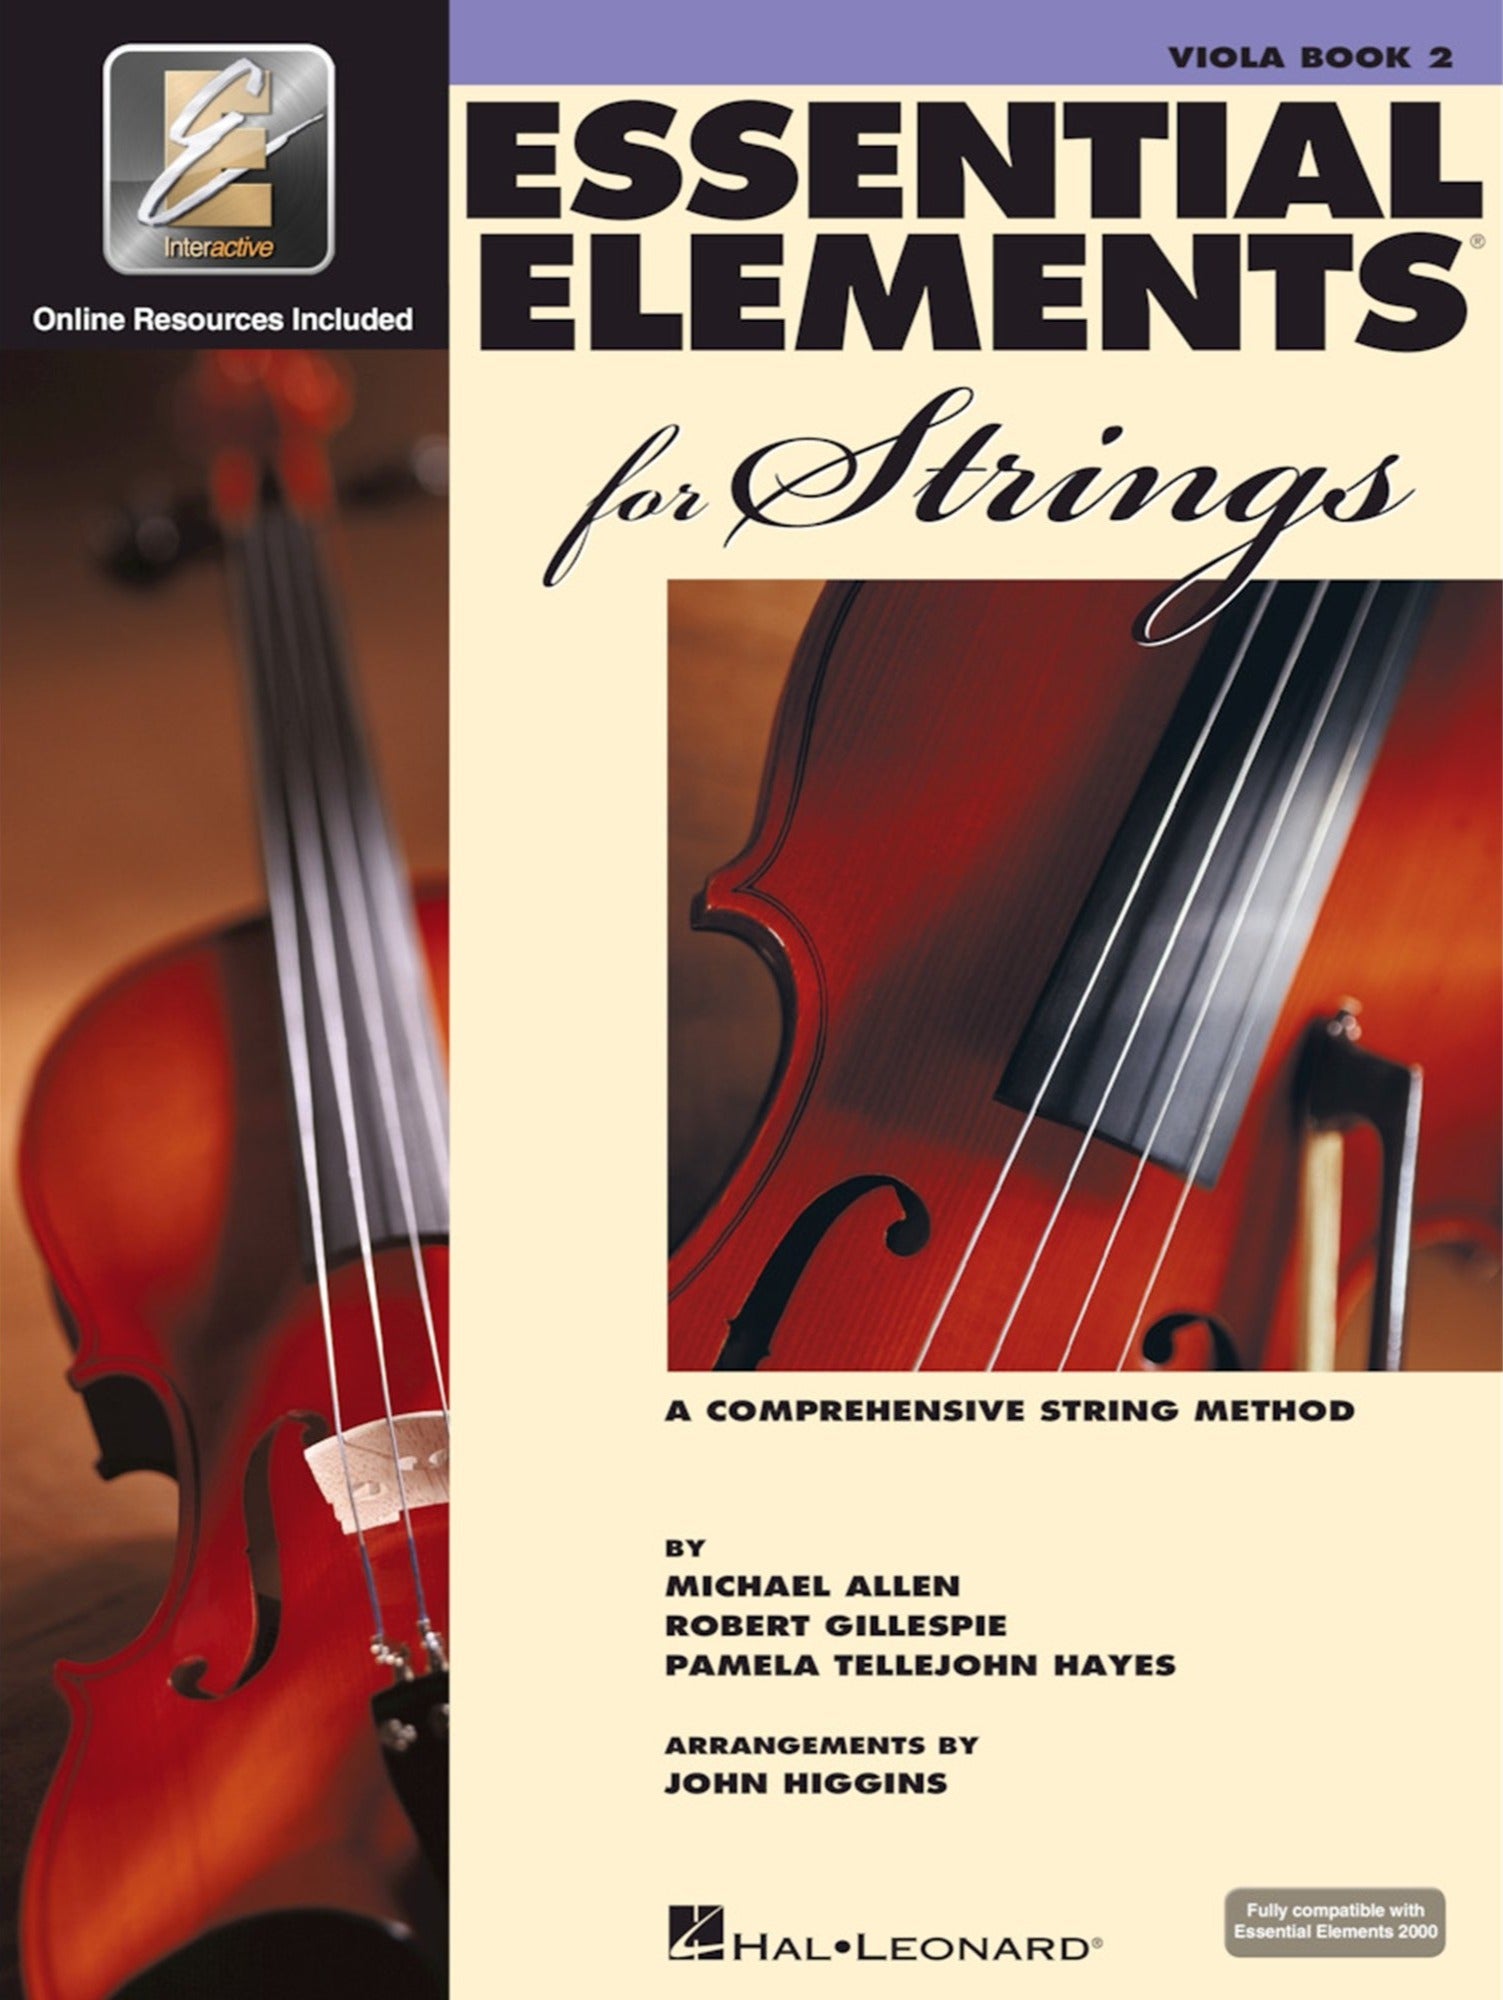 Essential Elements For Strings – Viola Book 2